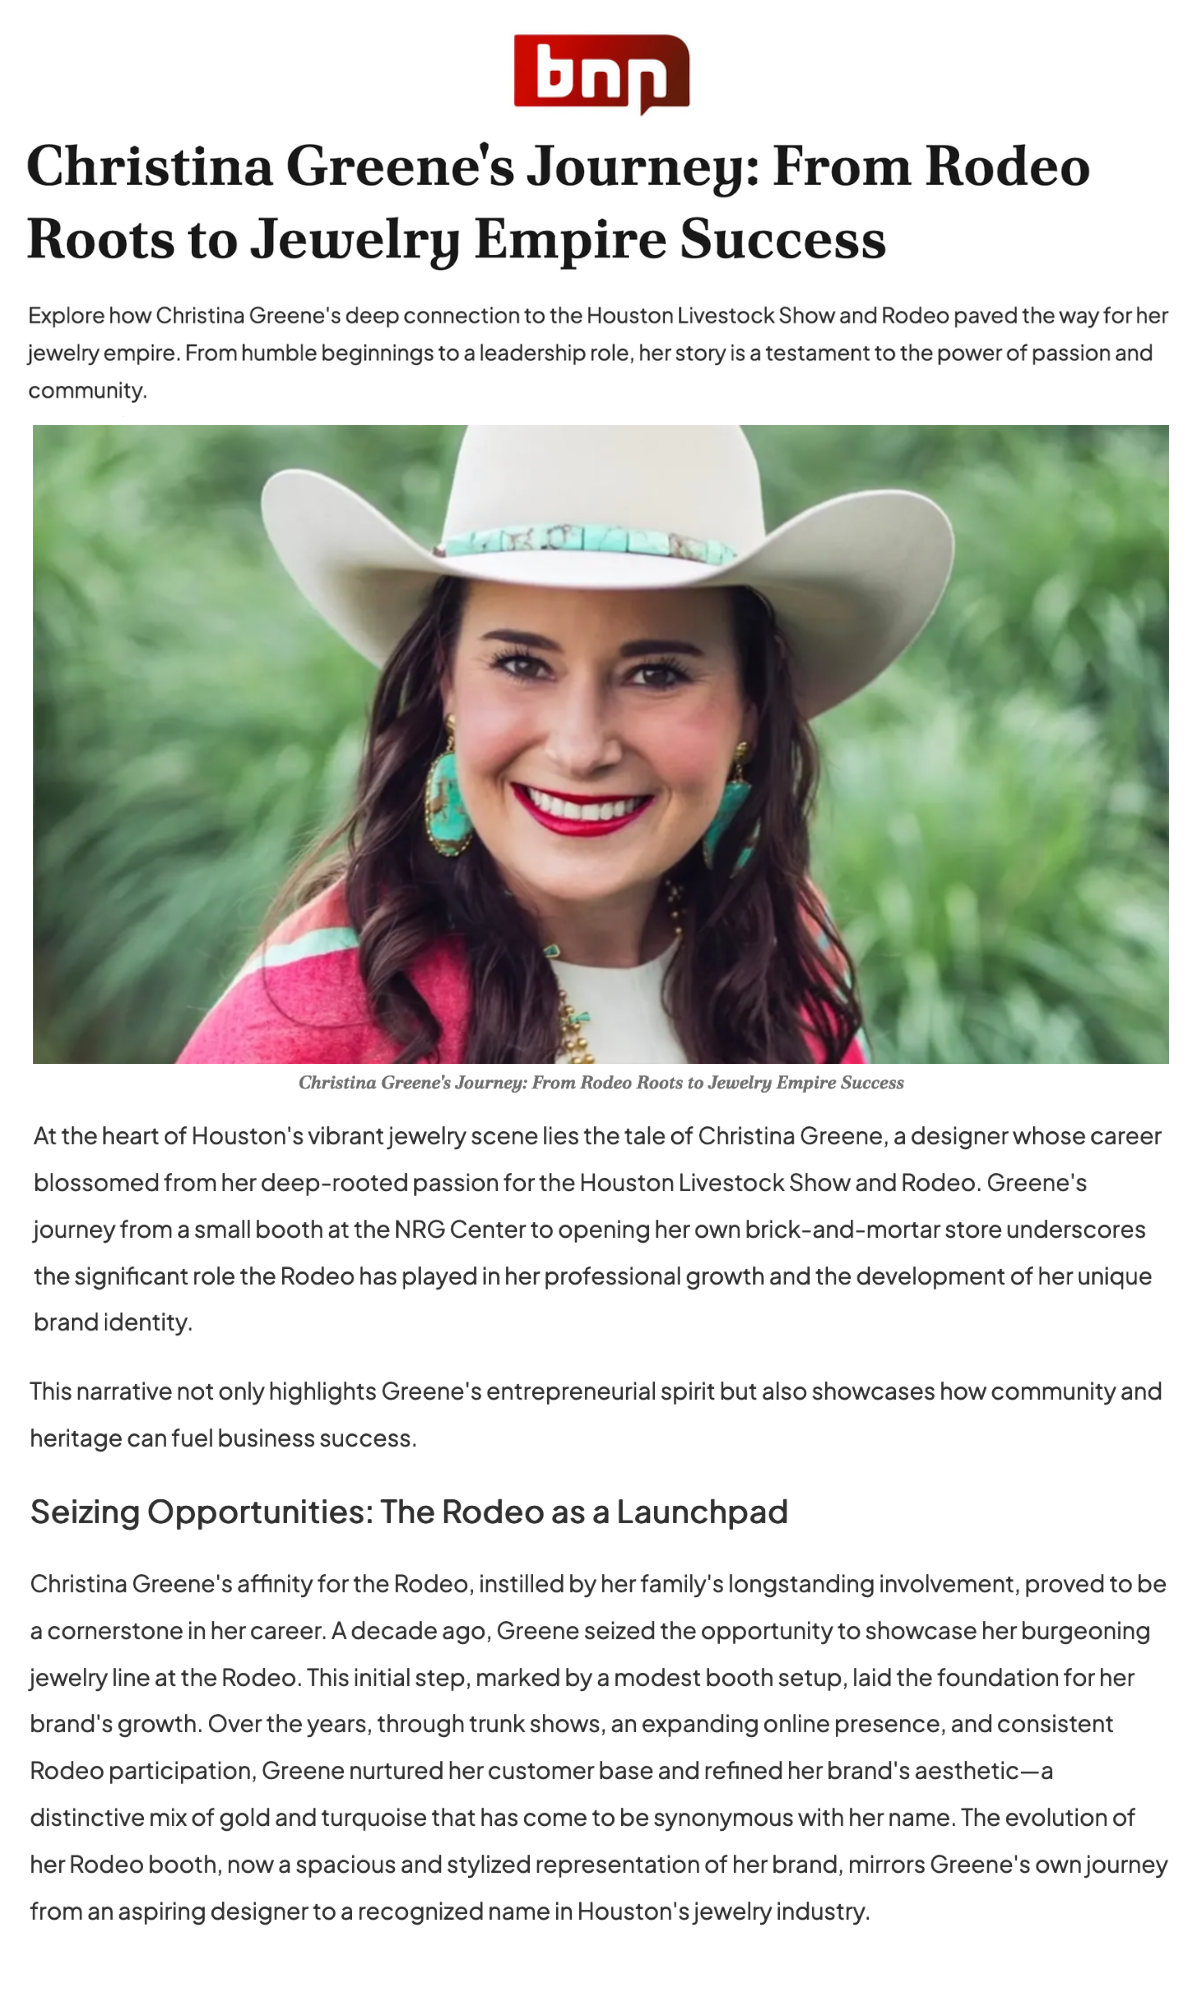 BNN Article About Christina Greene's Jewelry Line and History at the Houston Rodeo